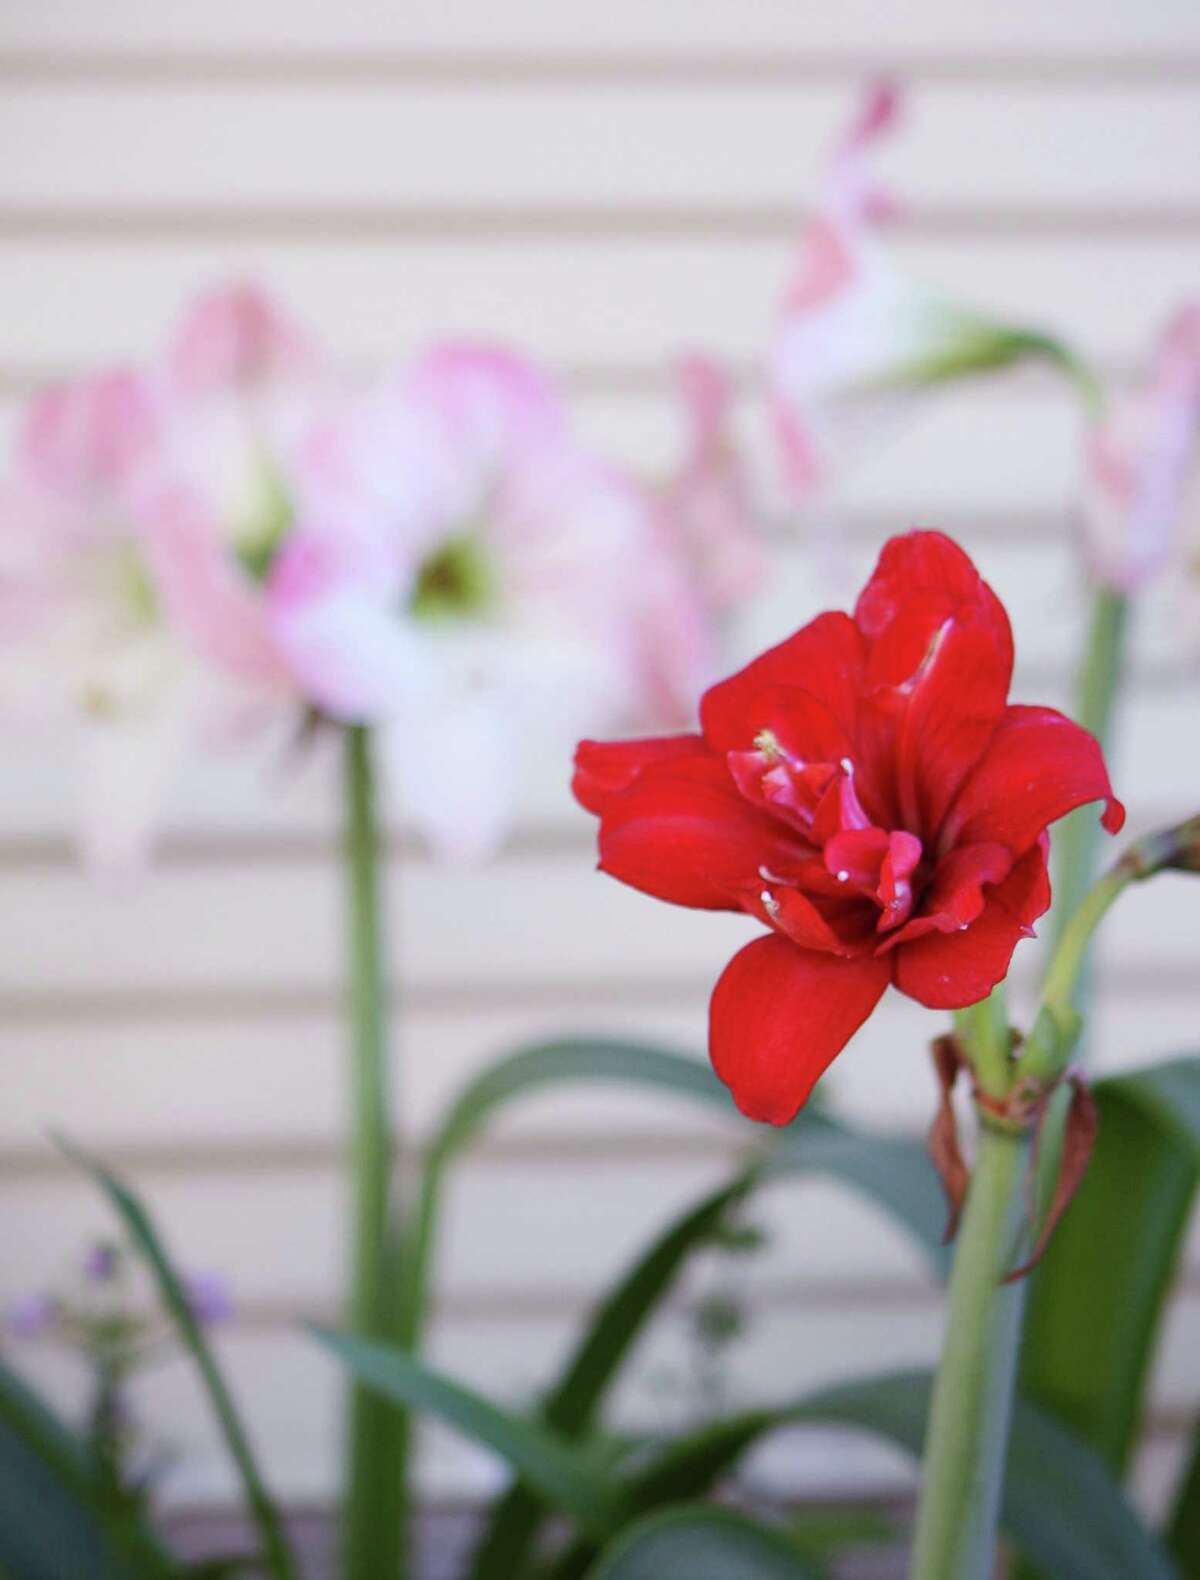 Amaryllis need a dry spell to trigger another round of blooms.